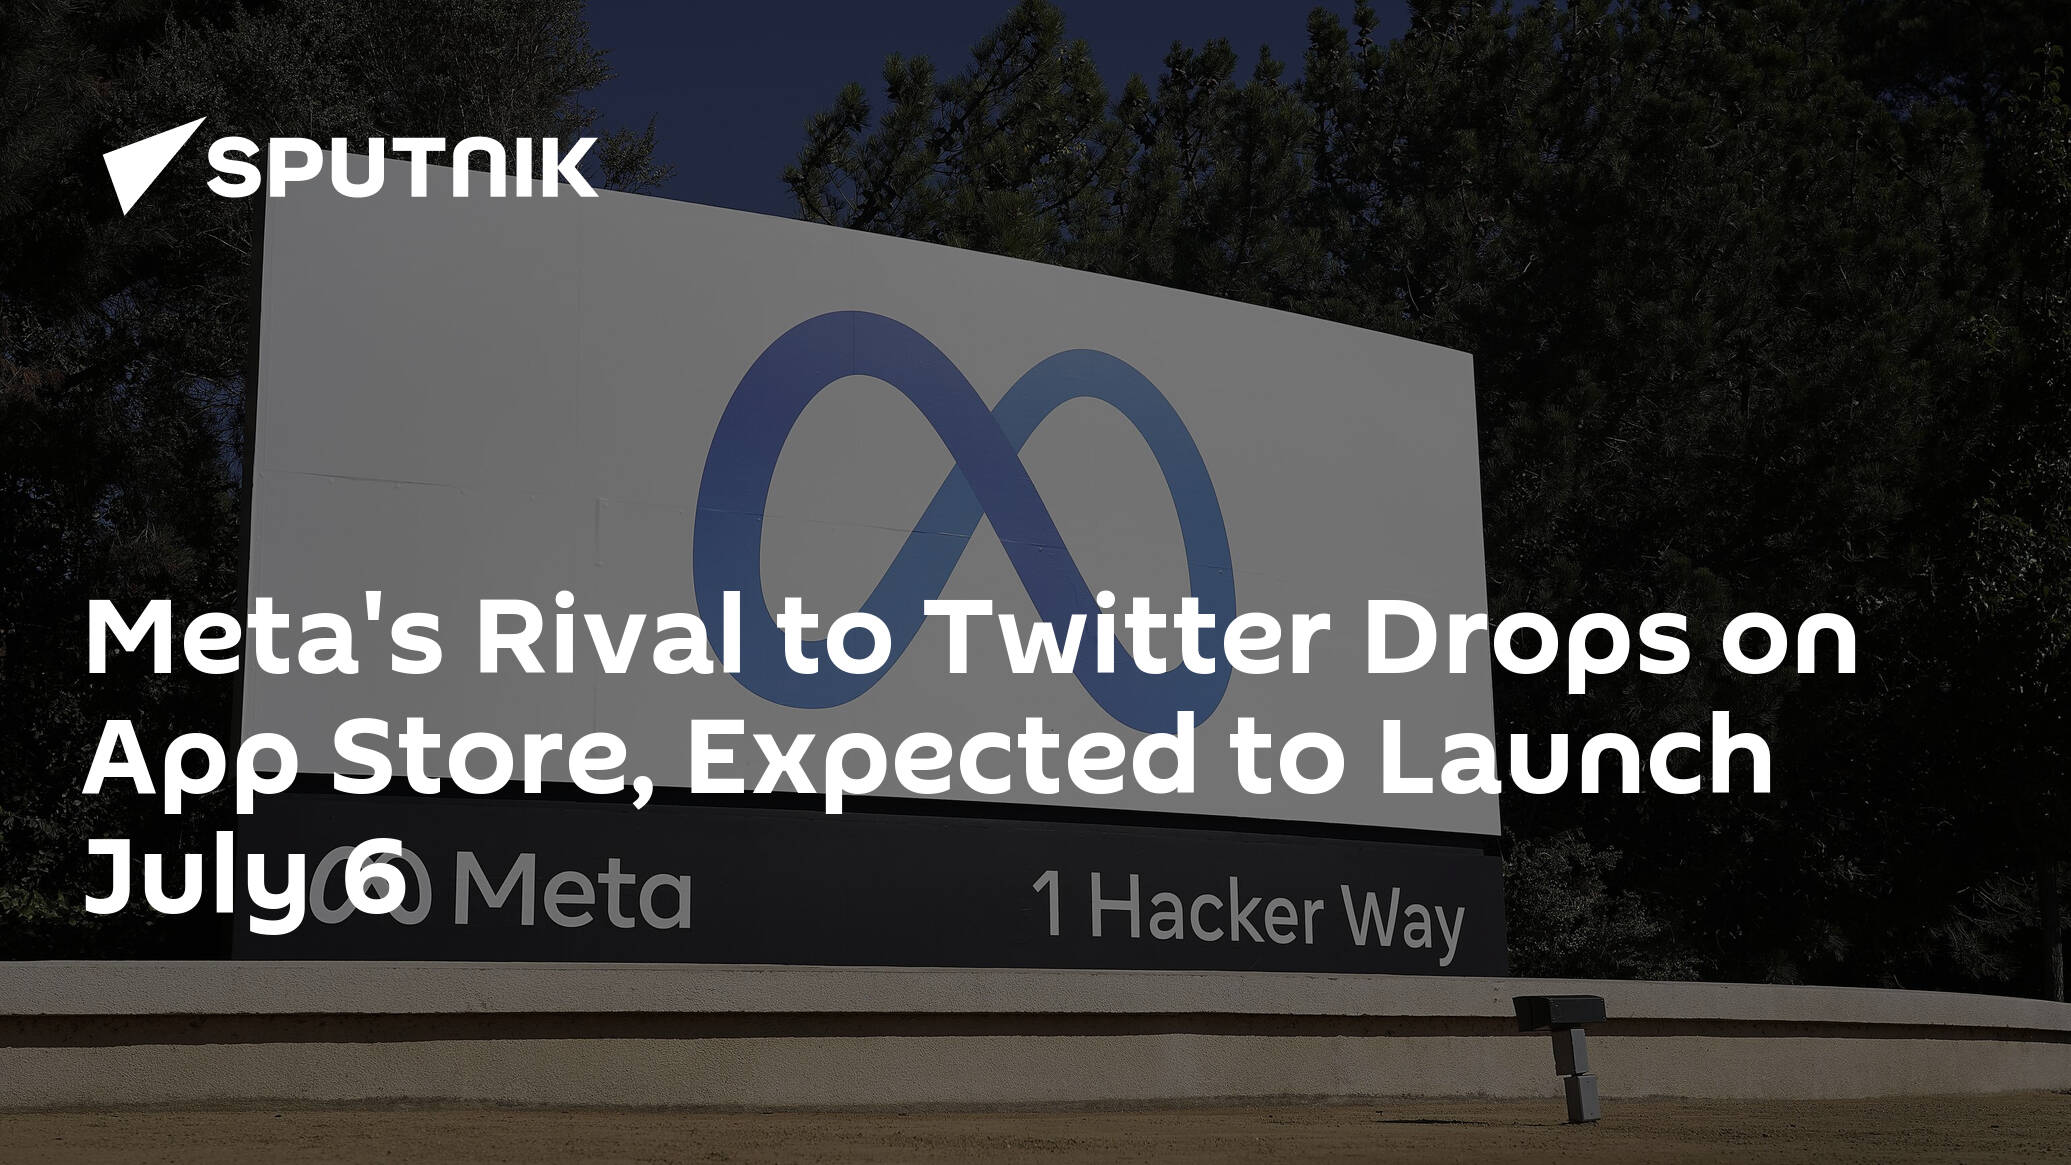 Meta's Rival to Twitter Drops on App Store, Expected to Launch July 6